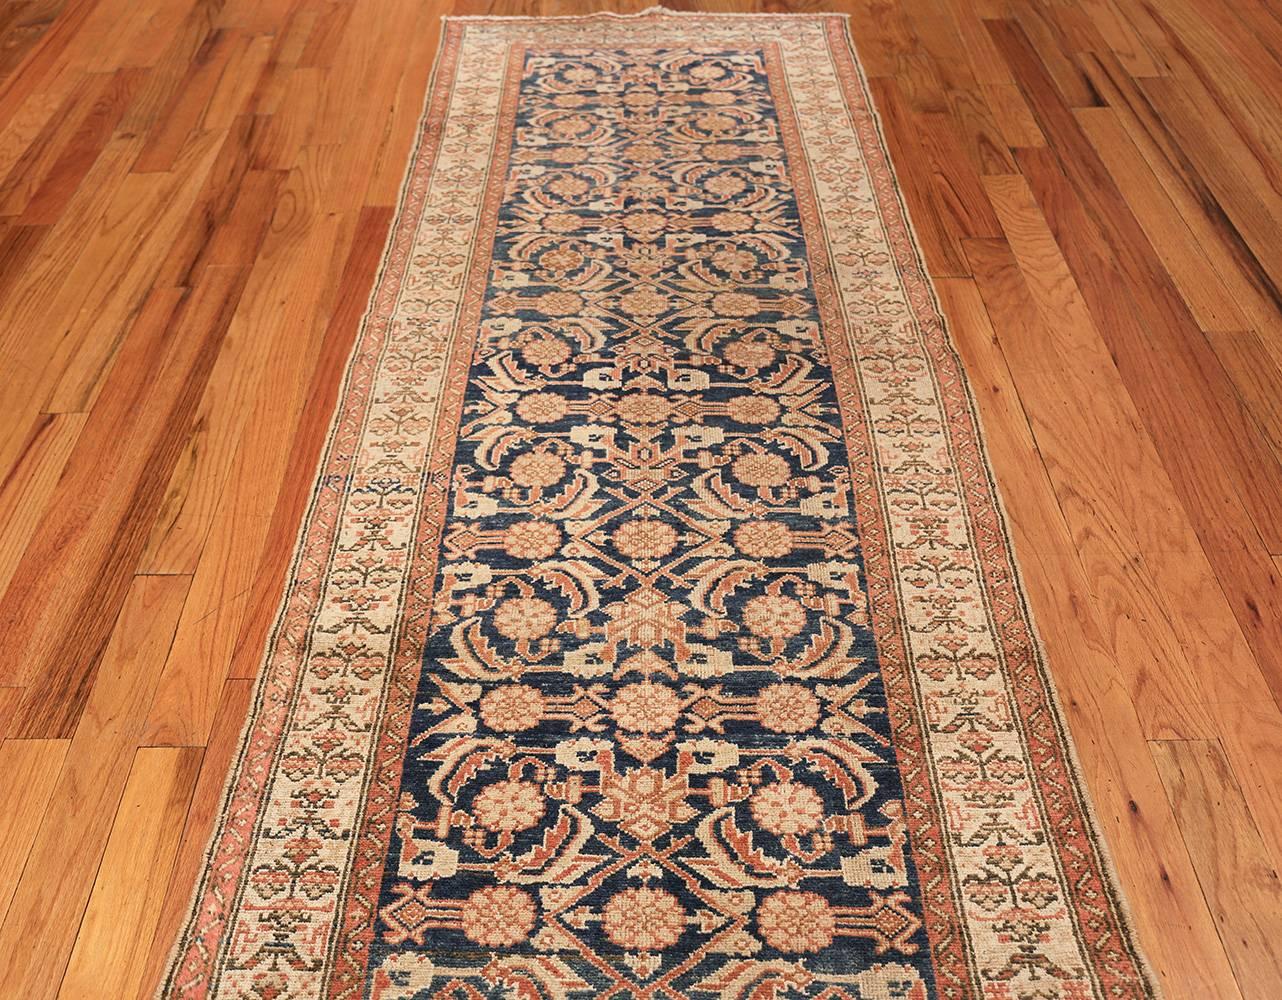 Antique Persian Malayer Hallway Runner Rug. Size: 3 ft 2 in x 16 ft 10 in  3